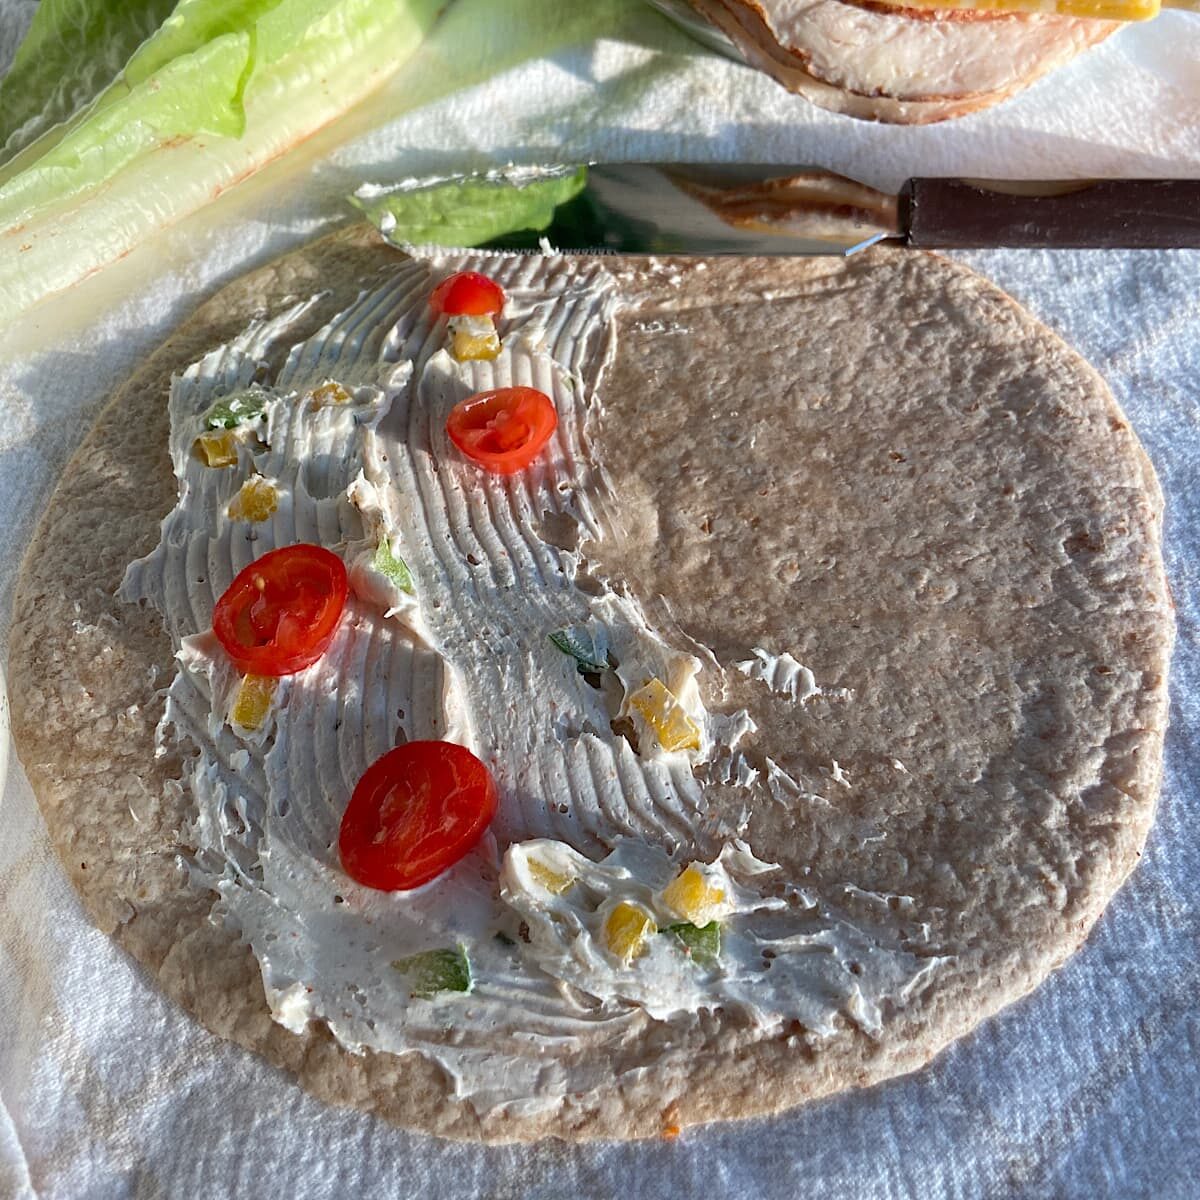 spread low-fat cream cheese over tortilla, sprinkle sliced tomatoes over cream cheese.